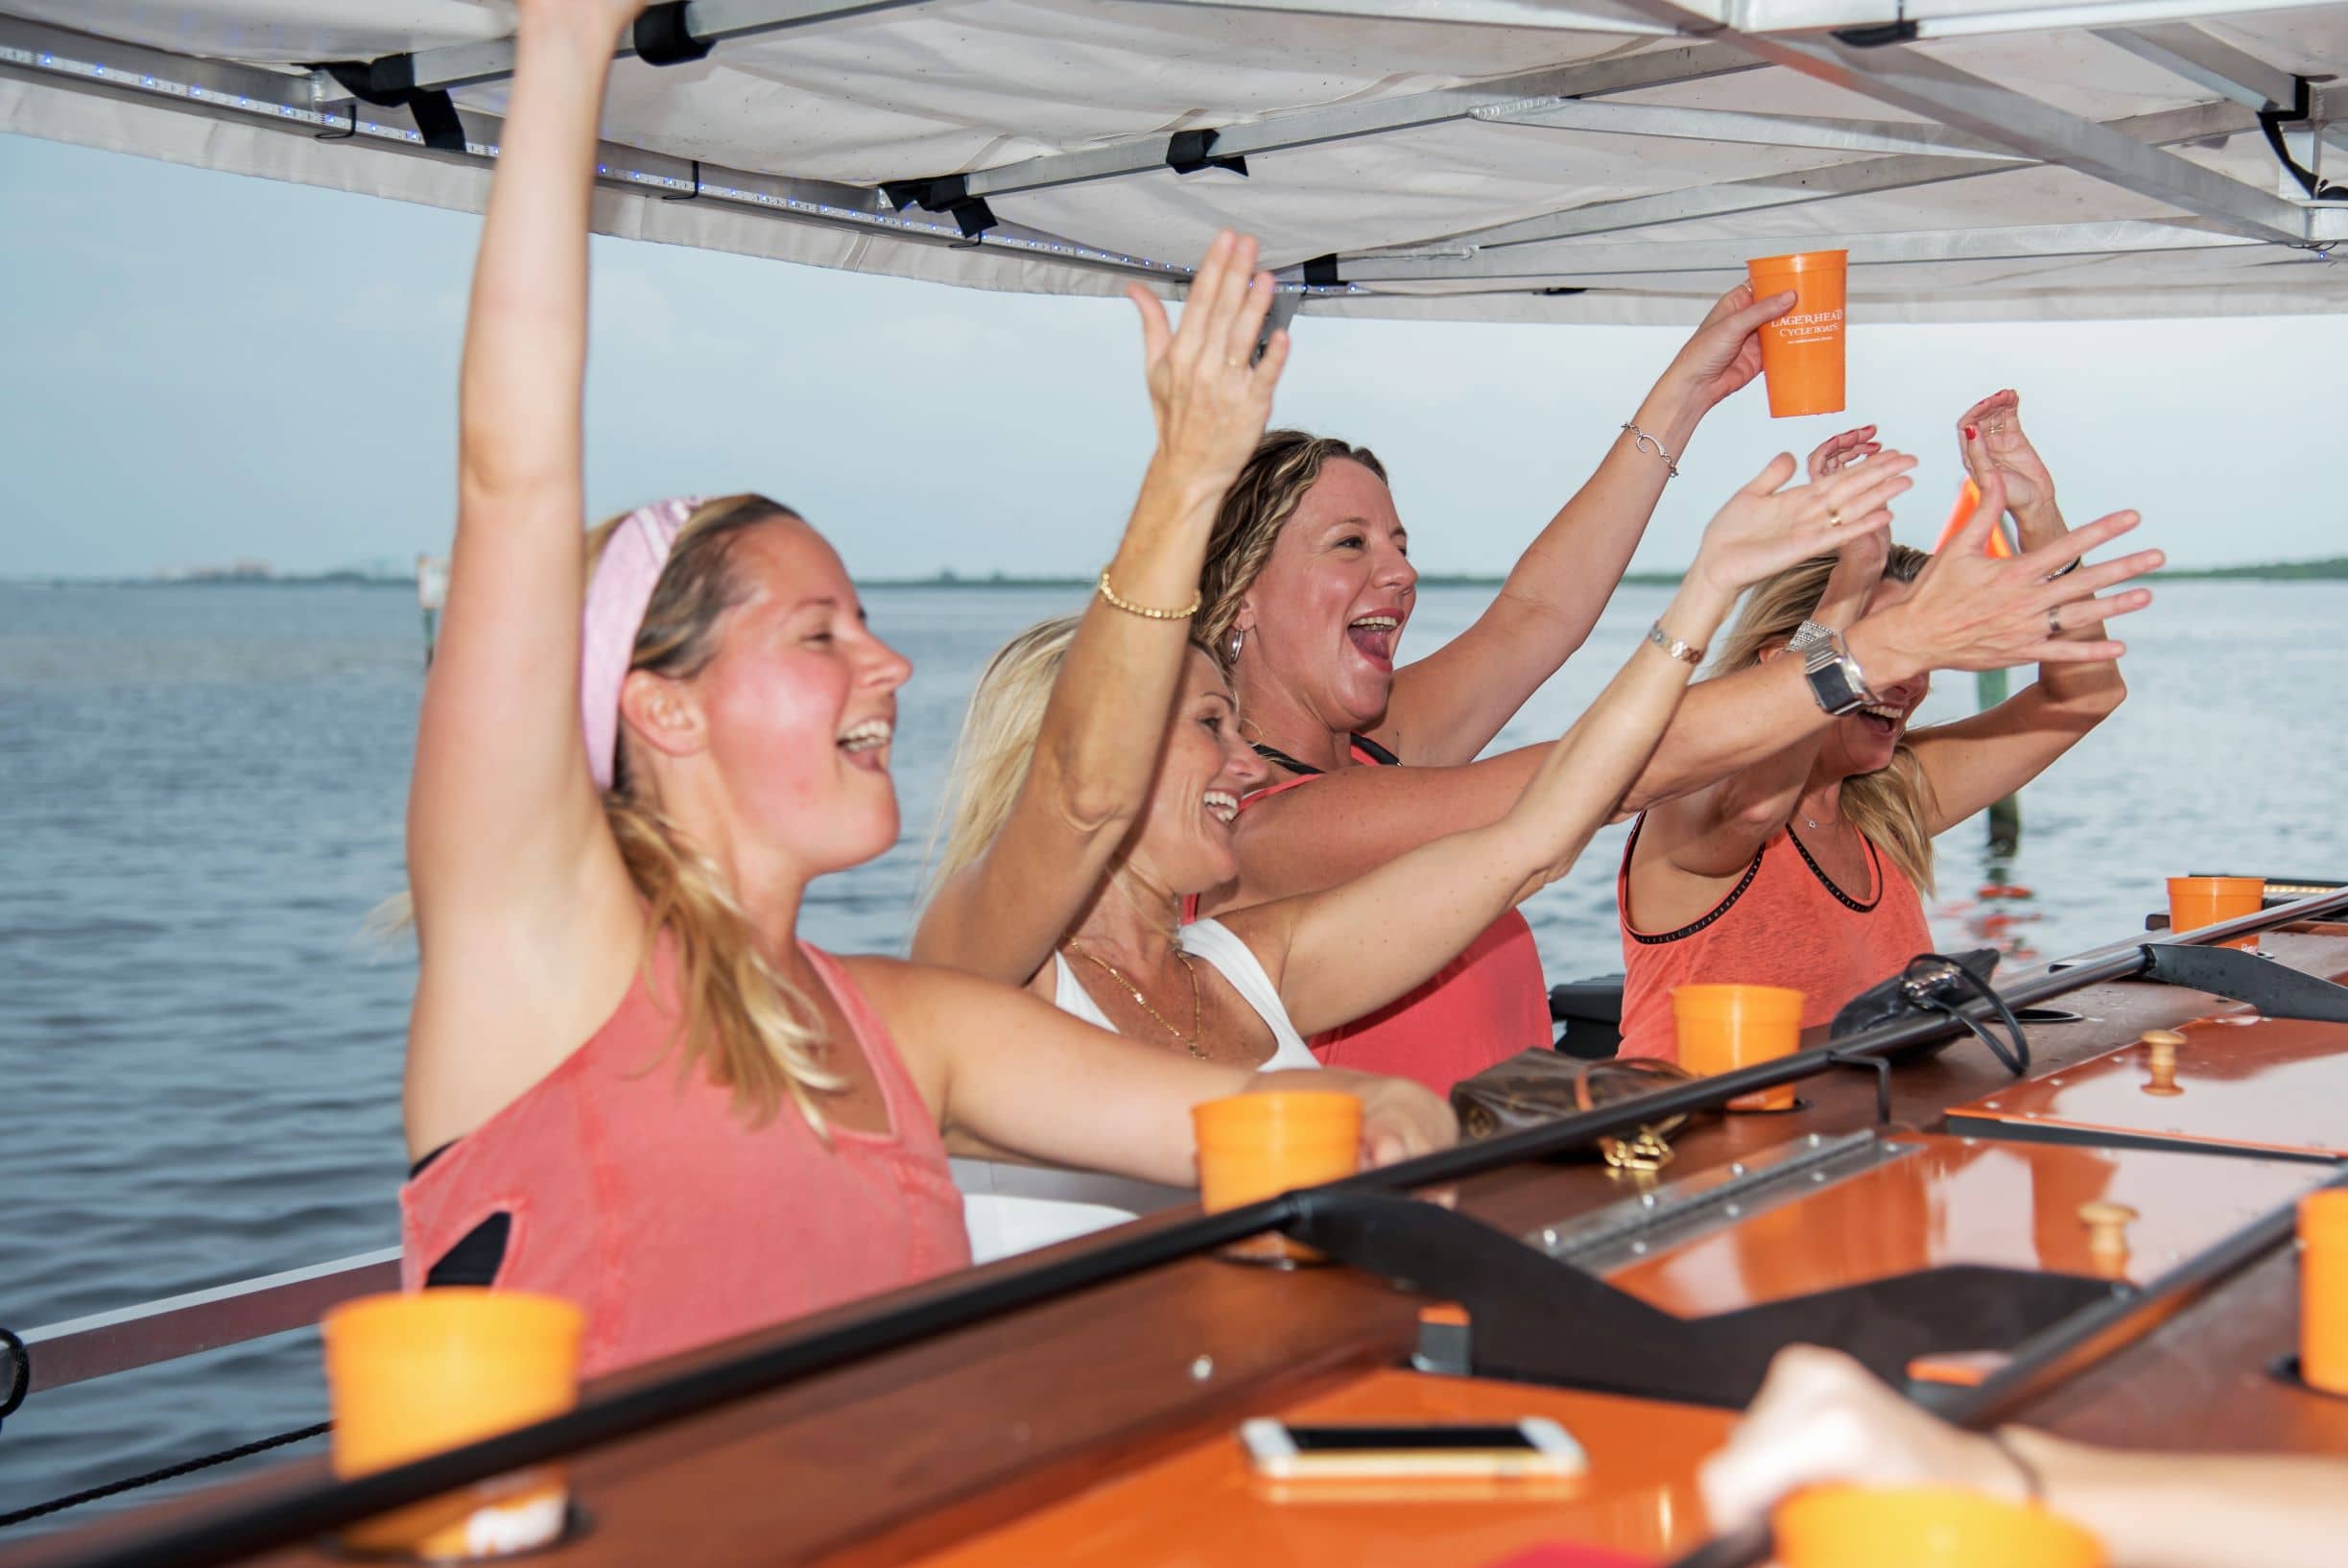 Friends raise their hands and cups in the air aboard a party boat, cheering.